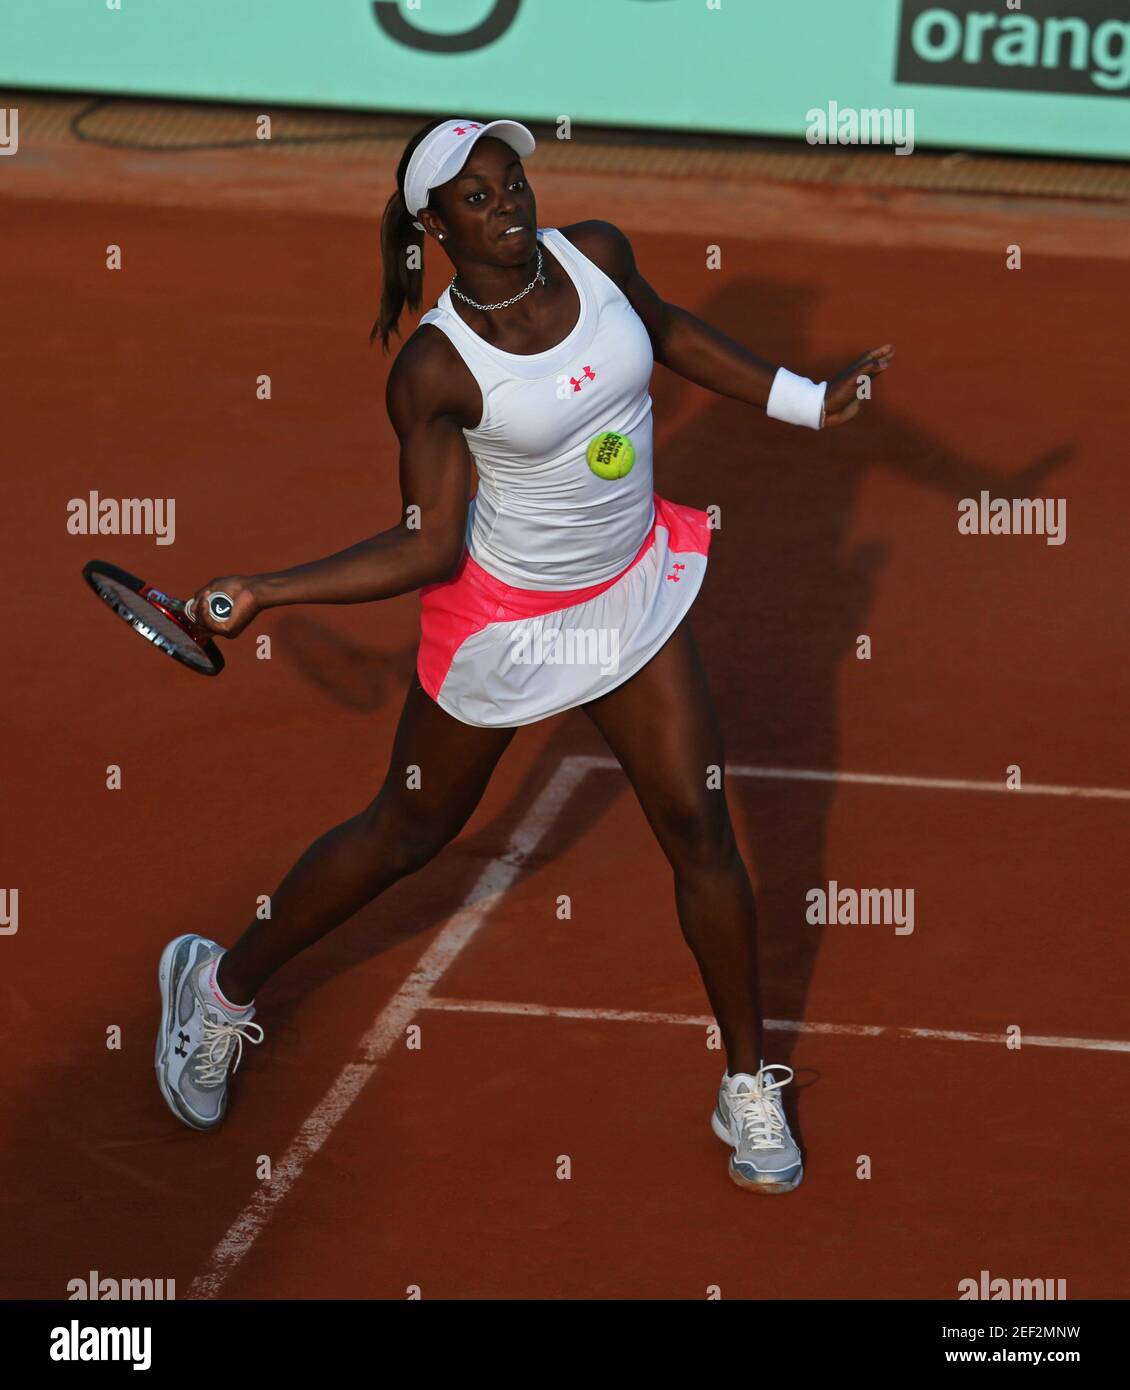 Tennis - French Open - Roland Garros, Paris, France - 3/6/12 Women's  Singles - USA's Sloane Stephens in action during her fourth round match  Mandatory Credit: Action Images / Paul Childs Stock Photo - Alamy